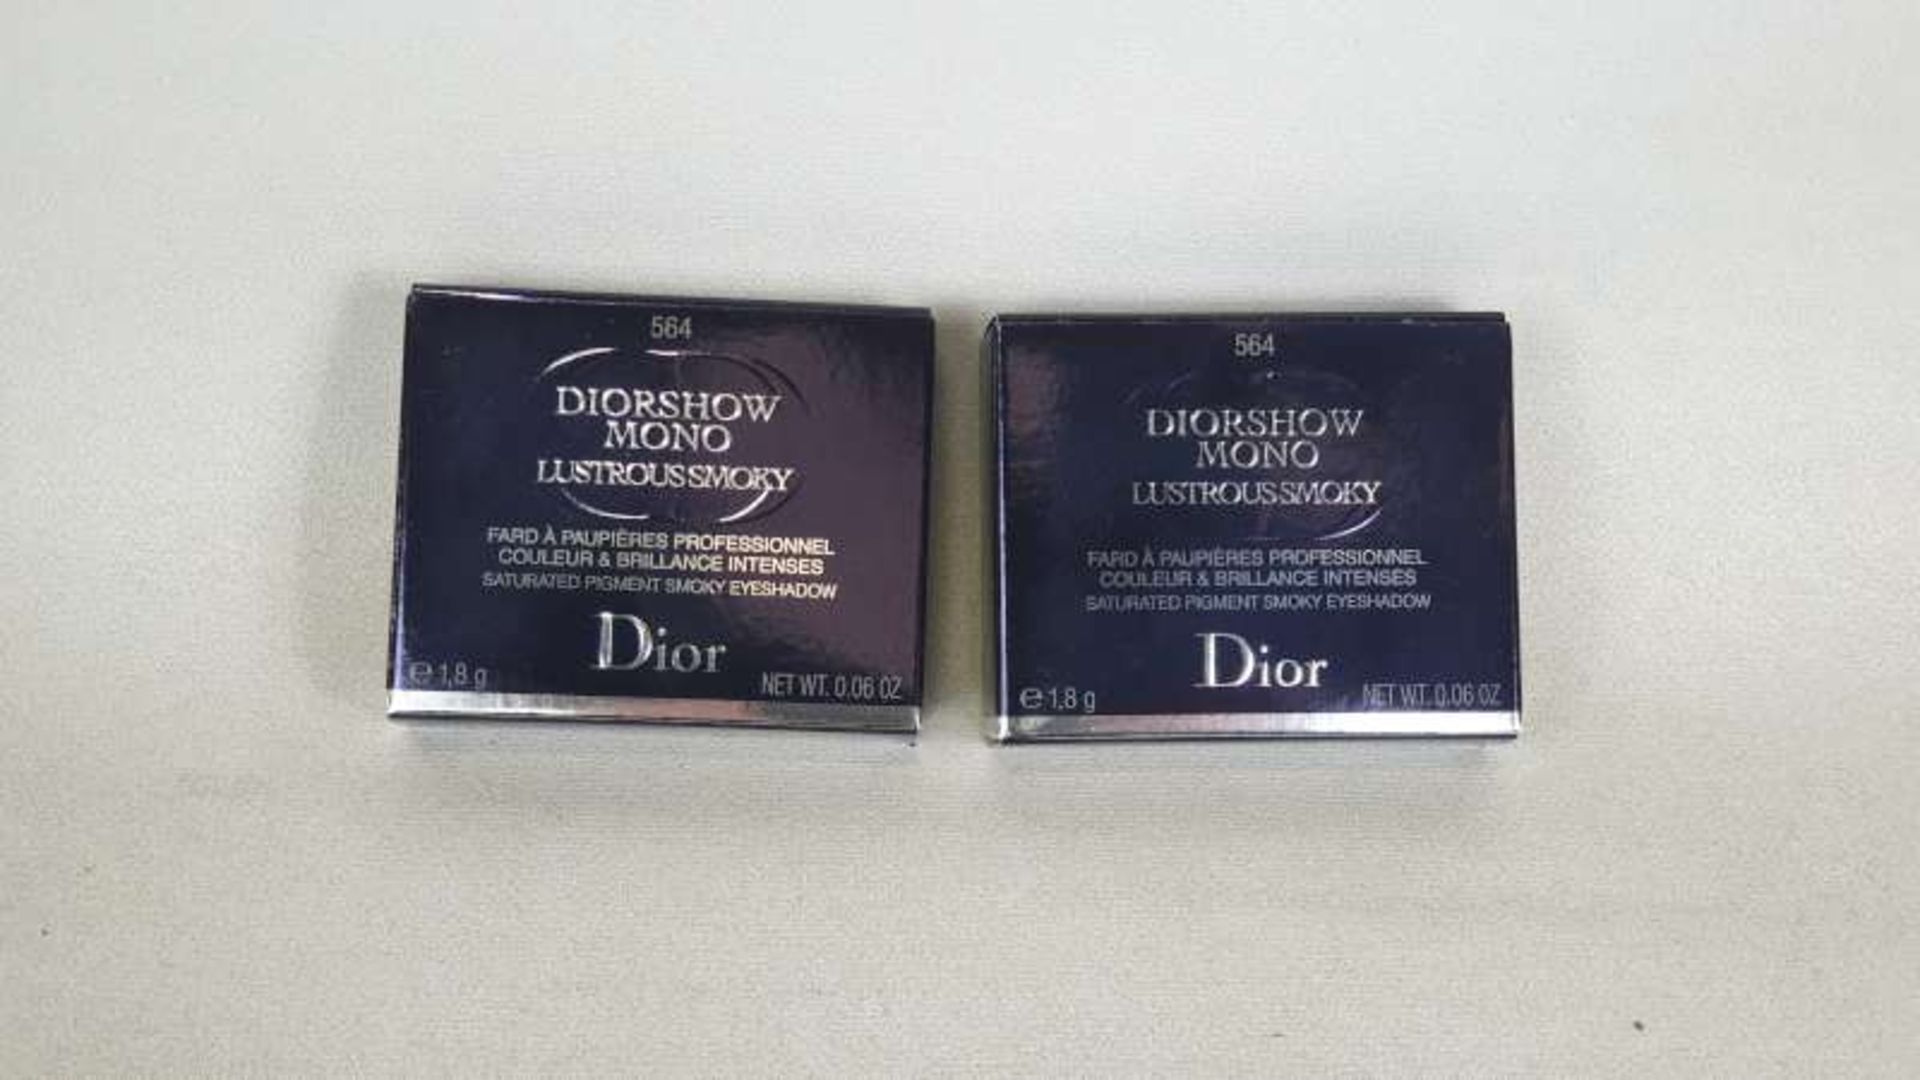 10 X DIOR SATURATED PIGMENT SMOKY EYESHADOW